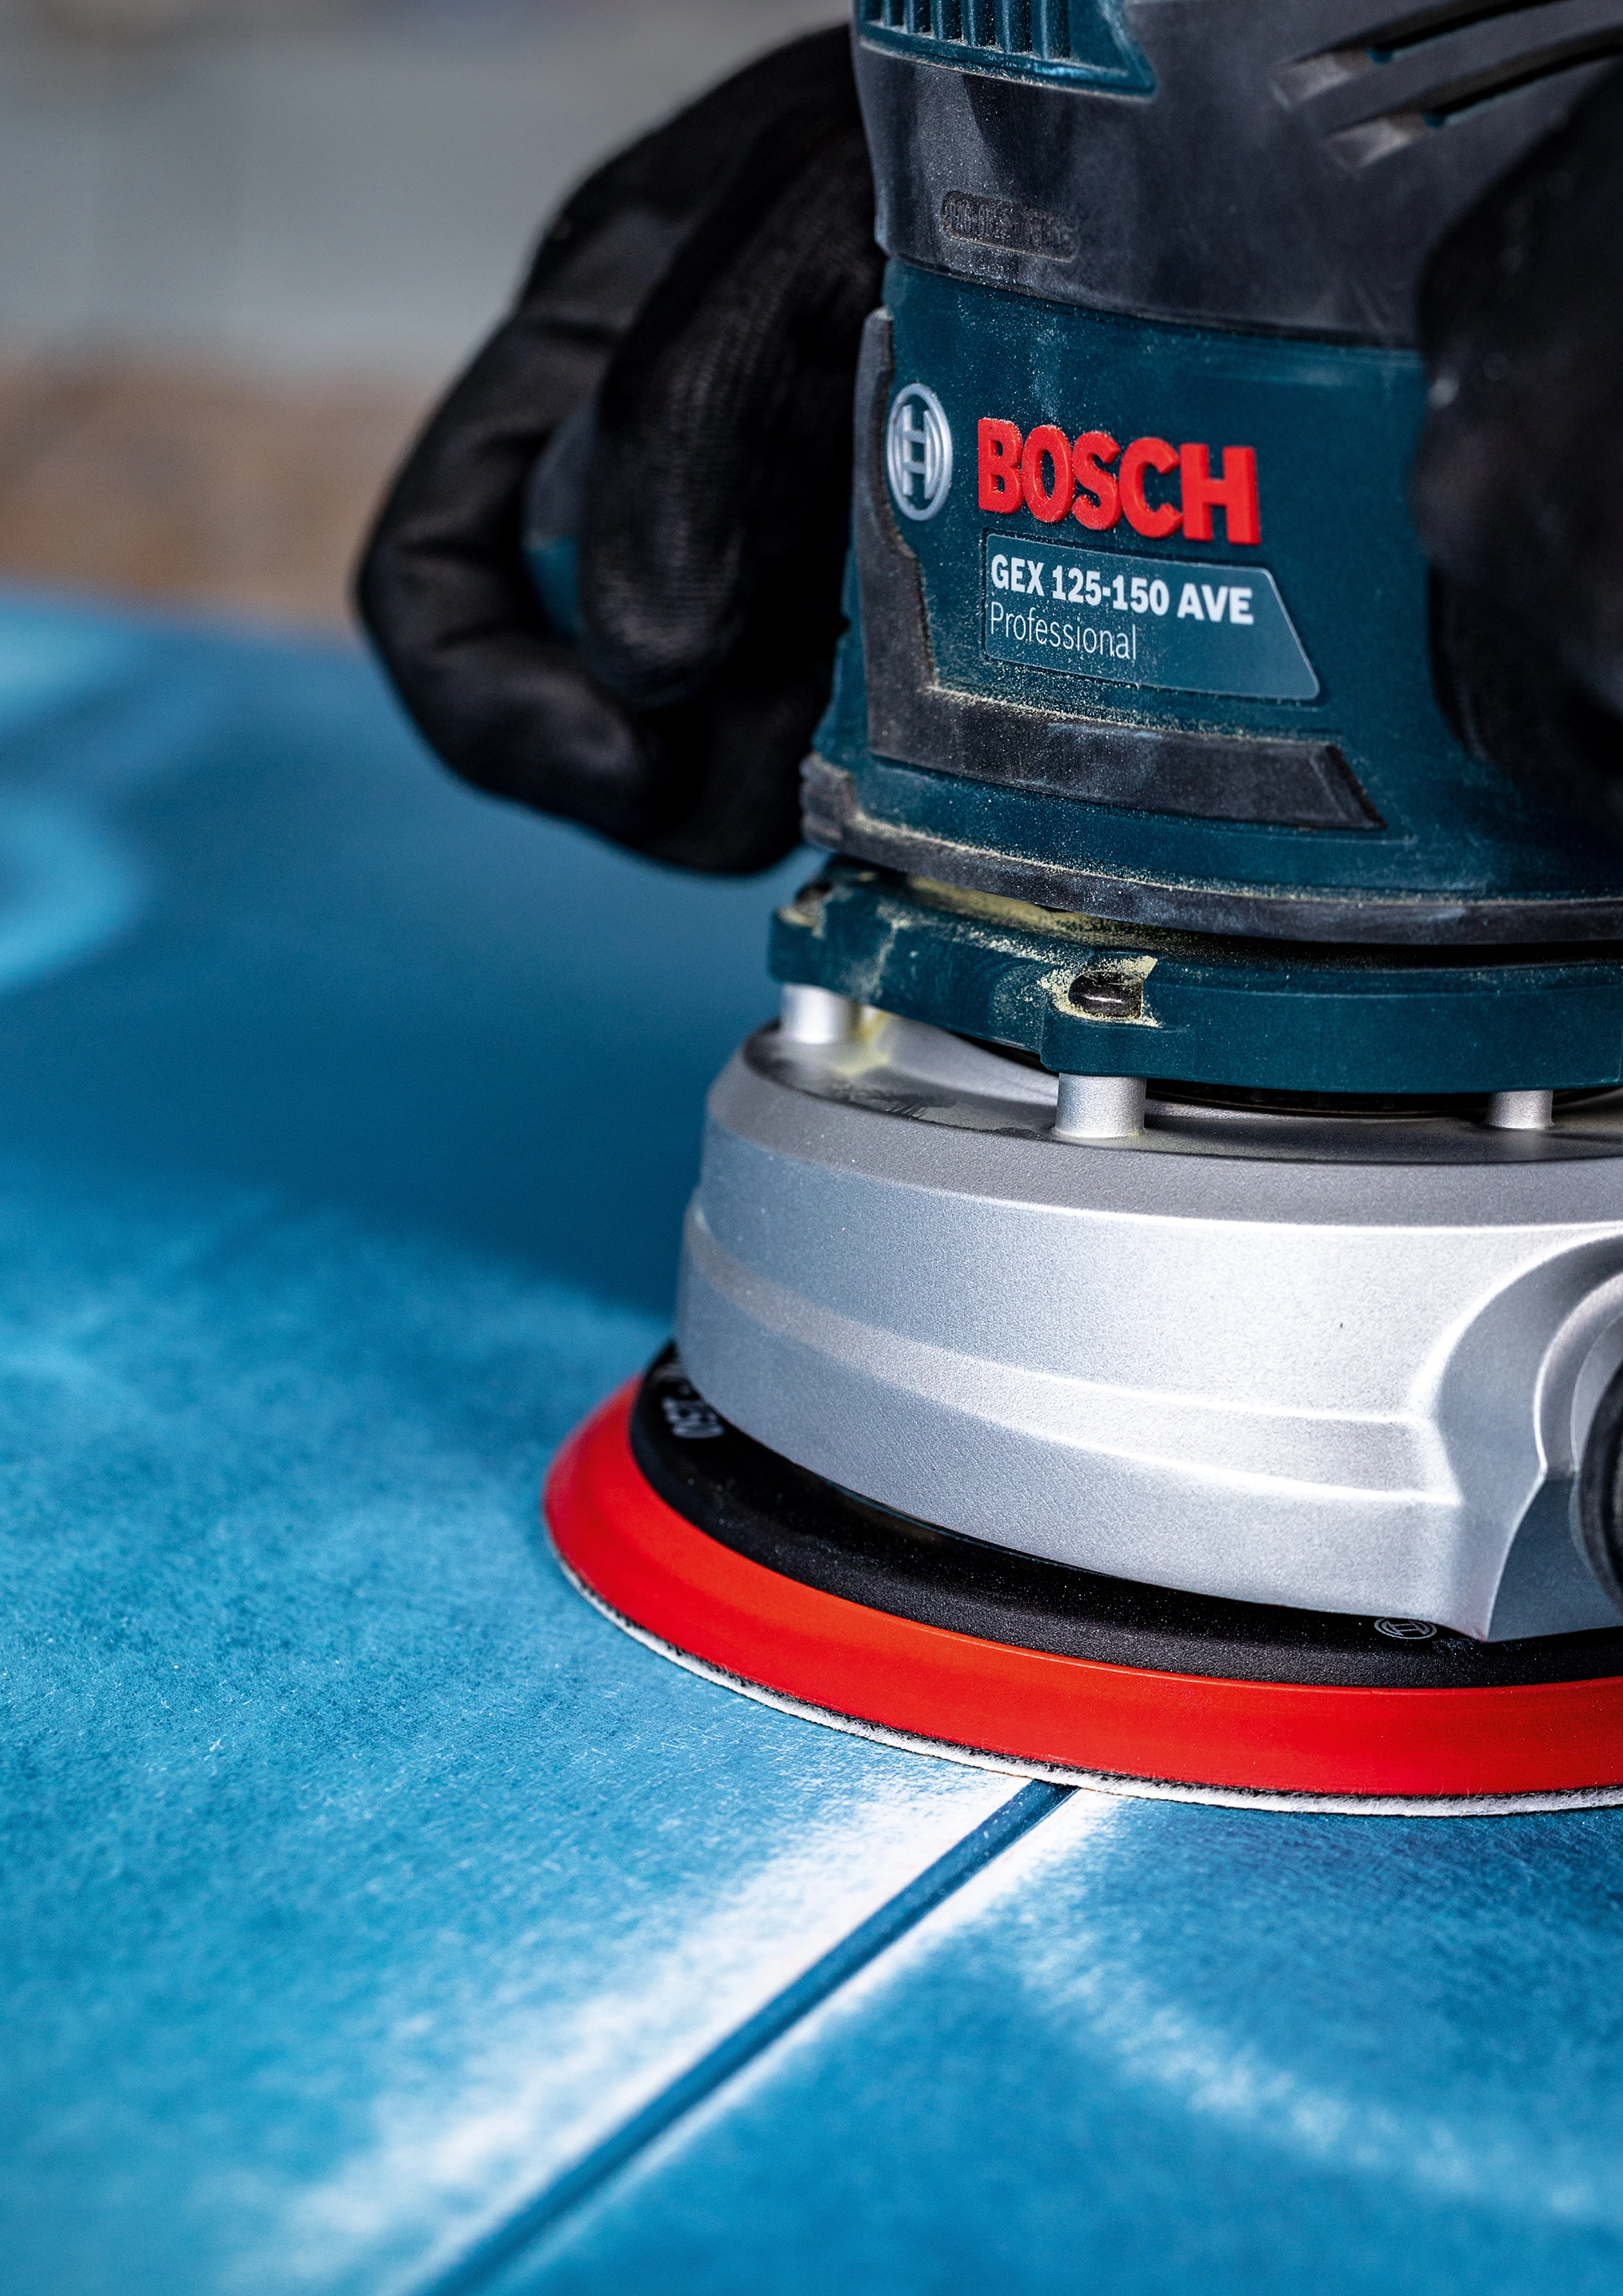 Test Outillage : Ponceuse excentrique Bosch Pro GEX 125-150AVE 